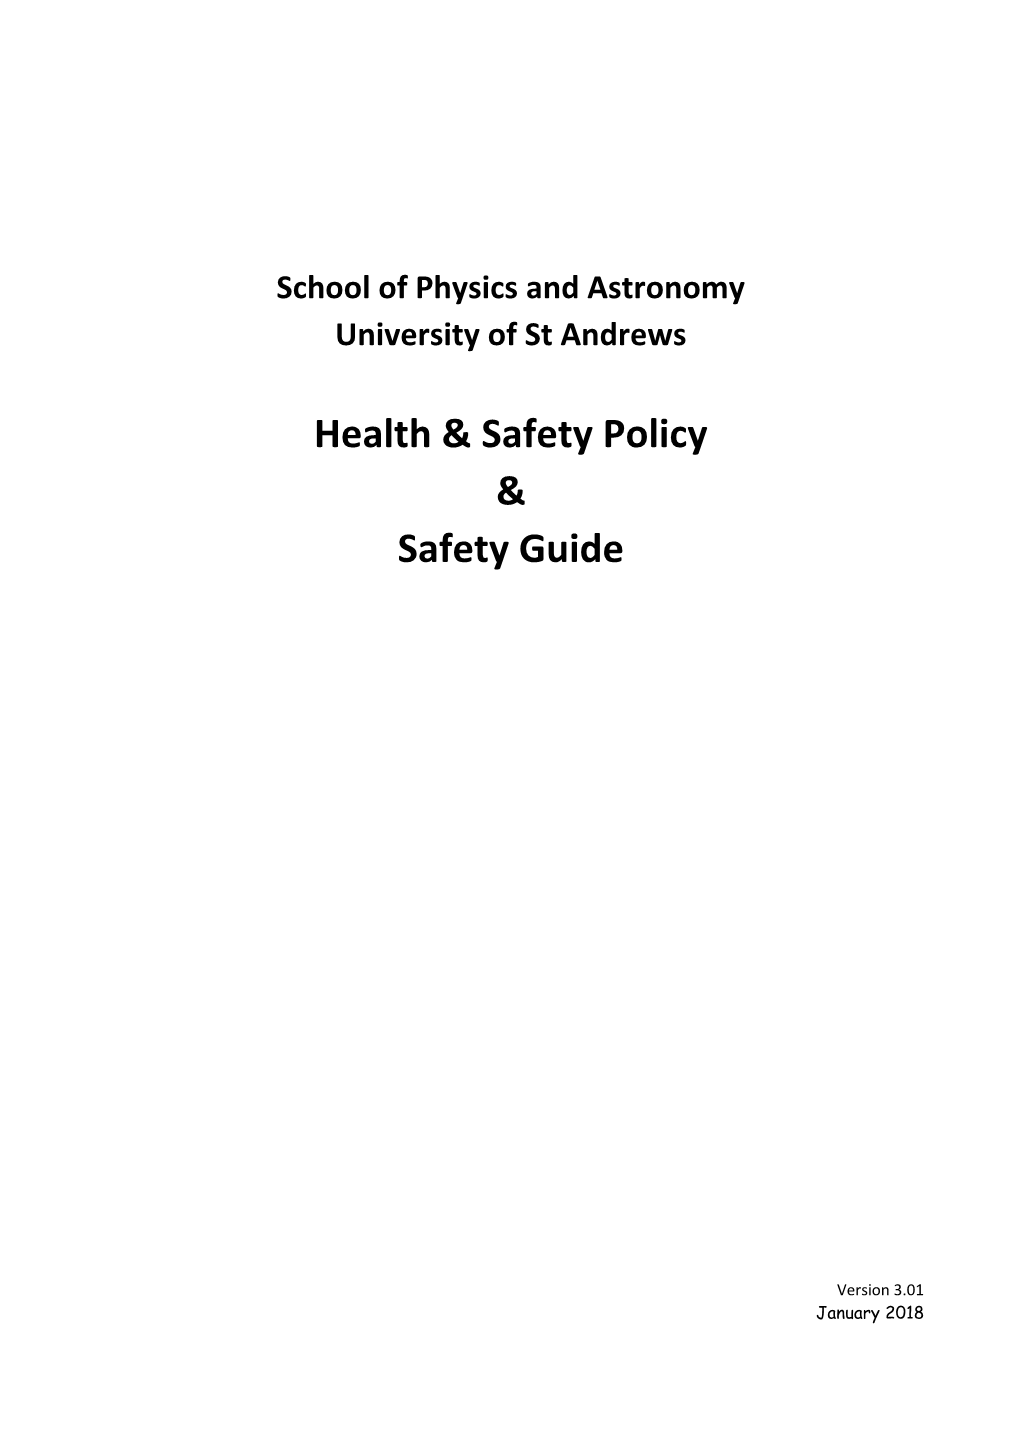 University of St Andrews' Physics and Astronomy Safety Booklet